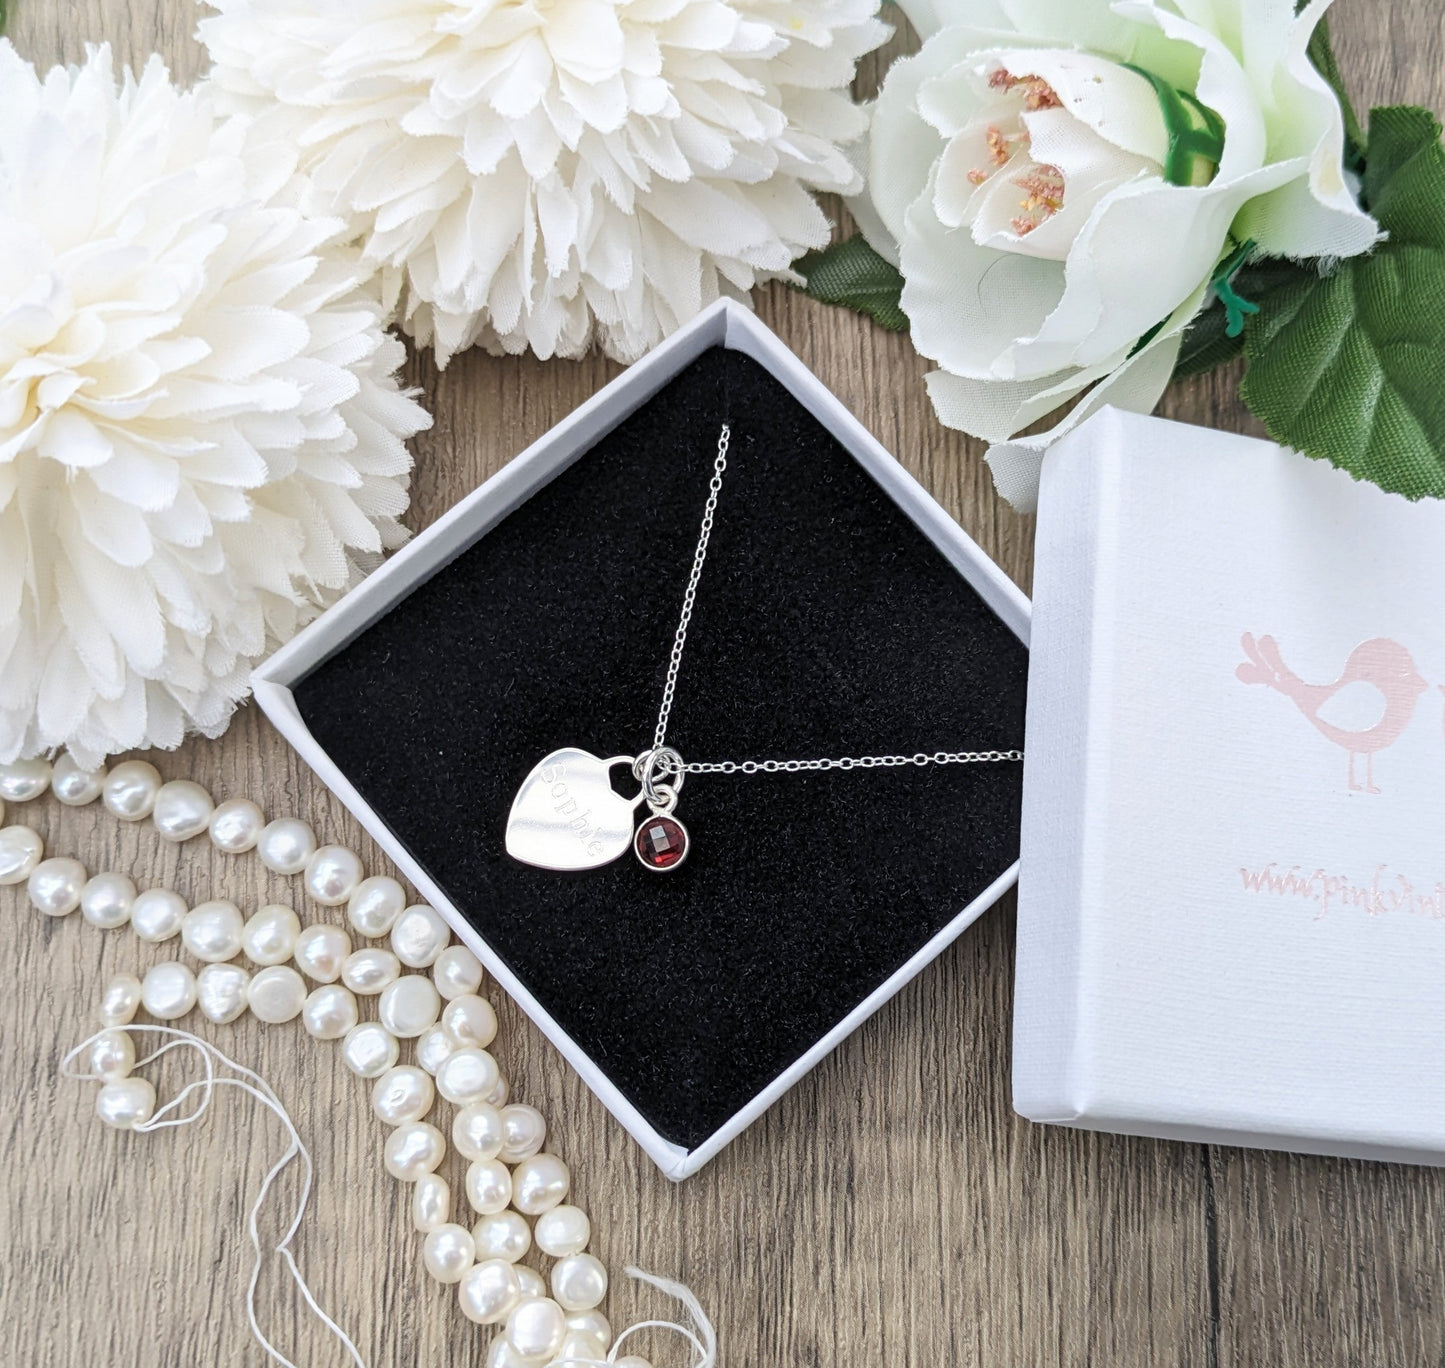 Personalised Mothers day necklace with birthstone.